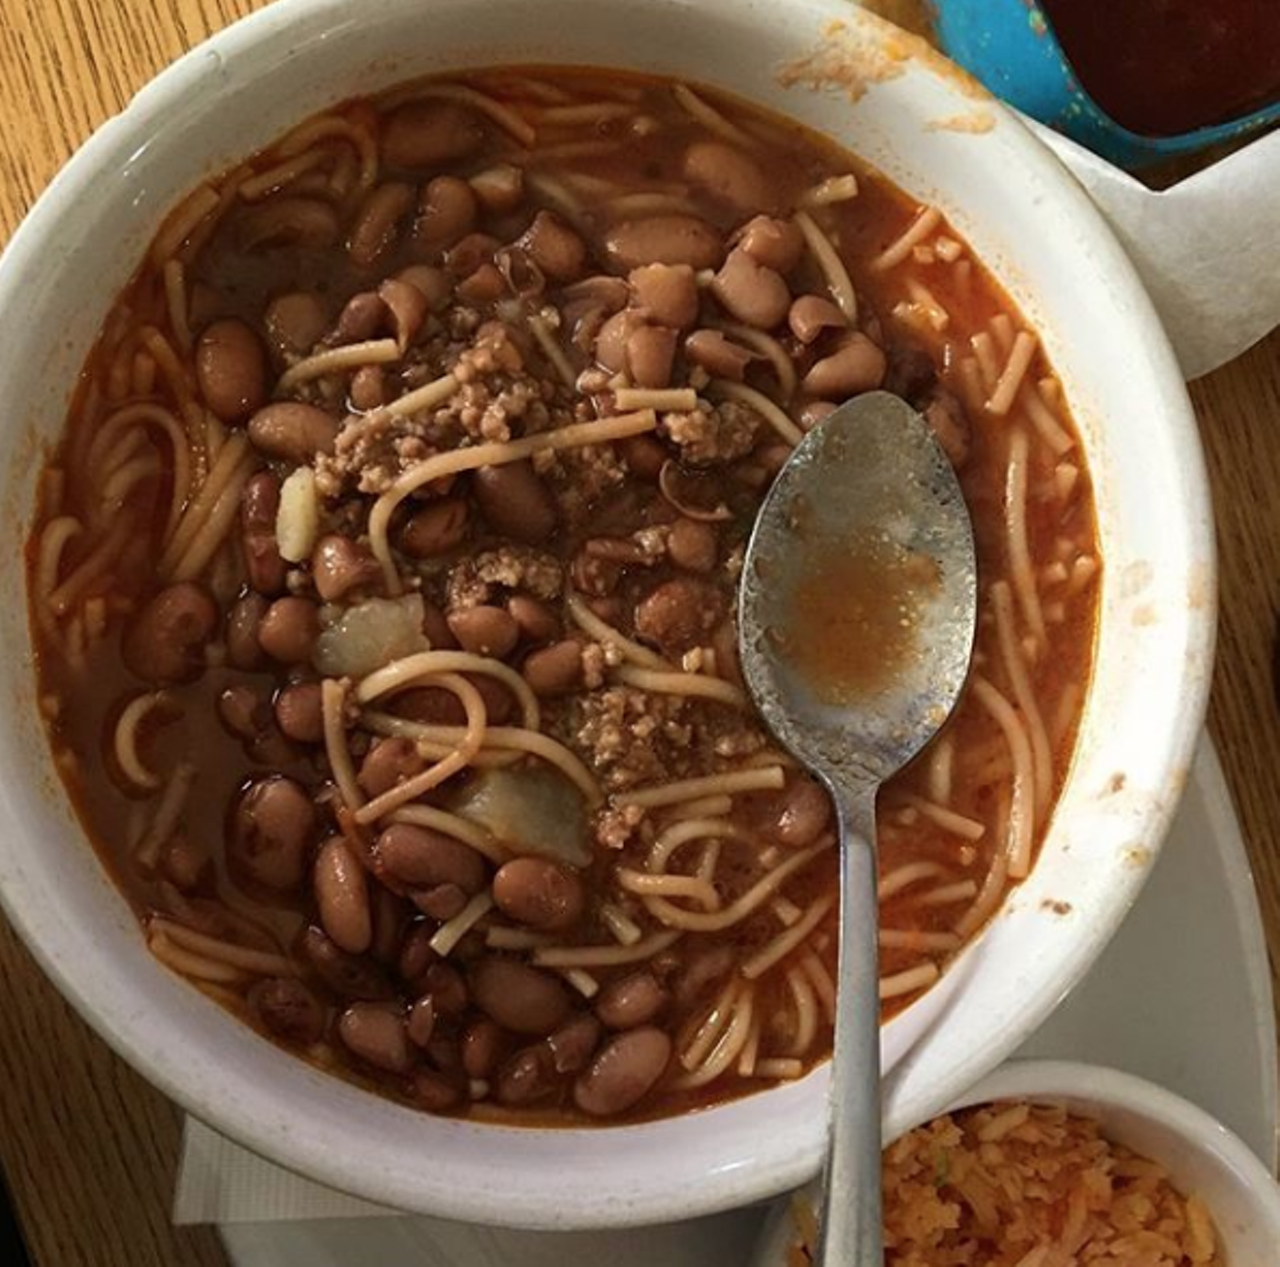 Fideo
It’s the dish that everyone grew up eating on the regular. While everyone will claim that their mom/grandma/aunt makes it best, we can all agree that fideo just satisfies in a way not all foods can. If you really know what’s good, you know that fideo loco is best.
Photo via Instagram / jesselizarraras